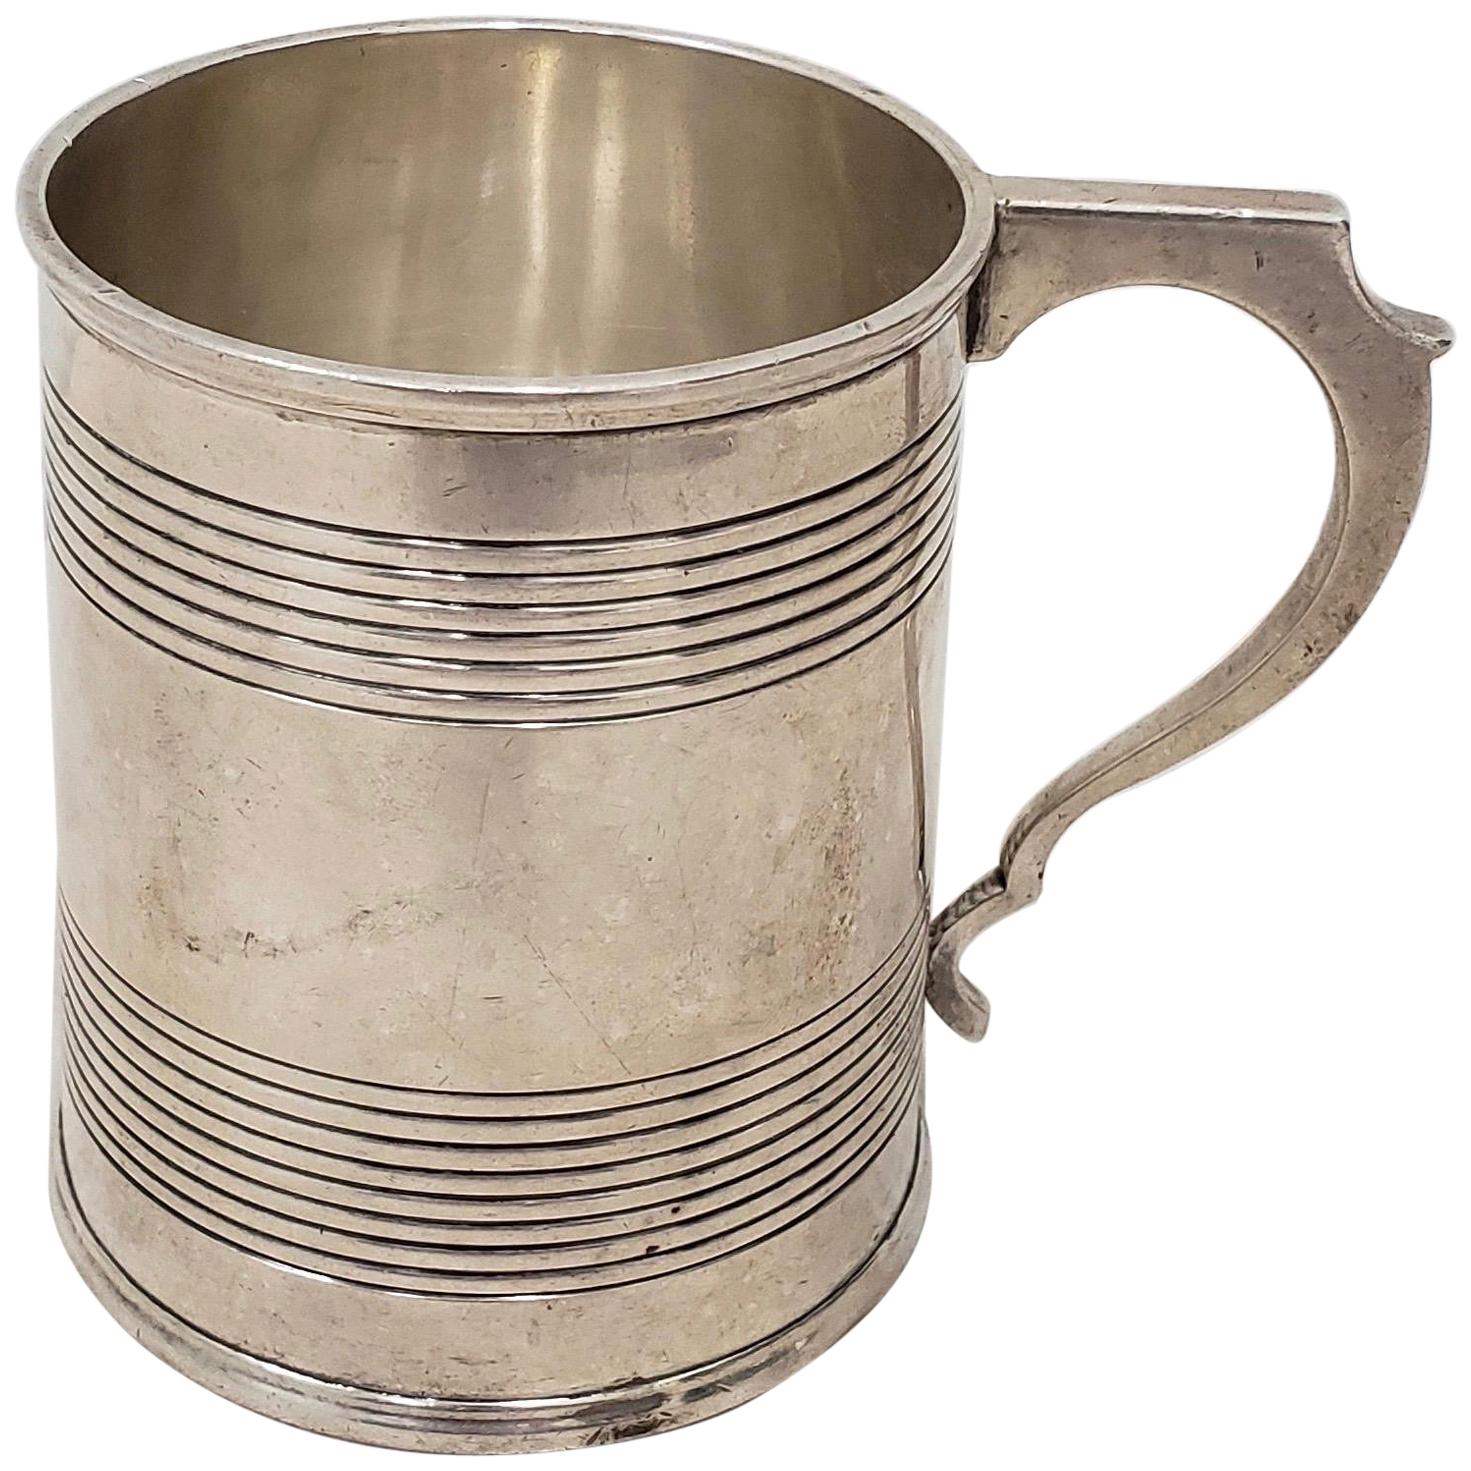 19th Century Sterling Silver Christening Cup with Hallmarks